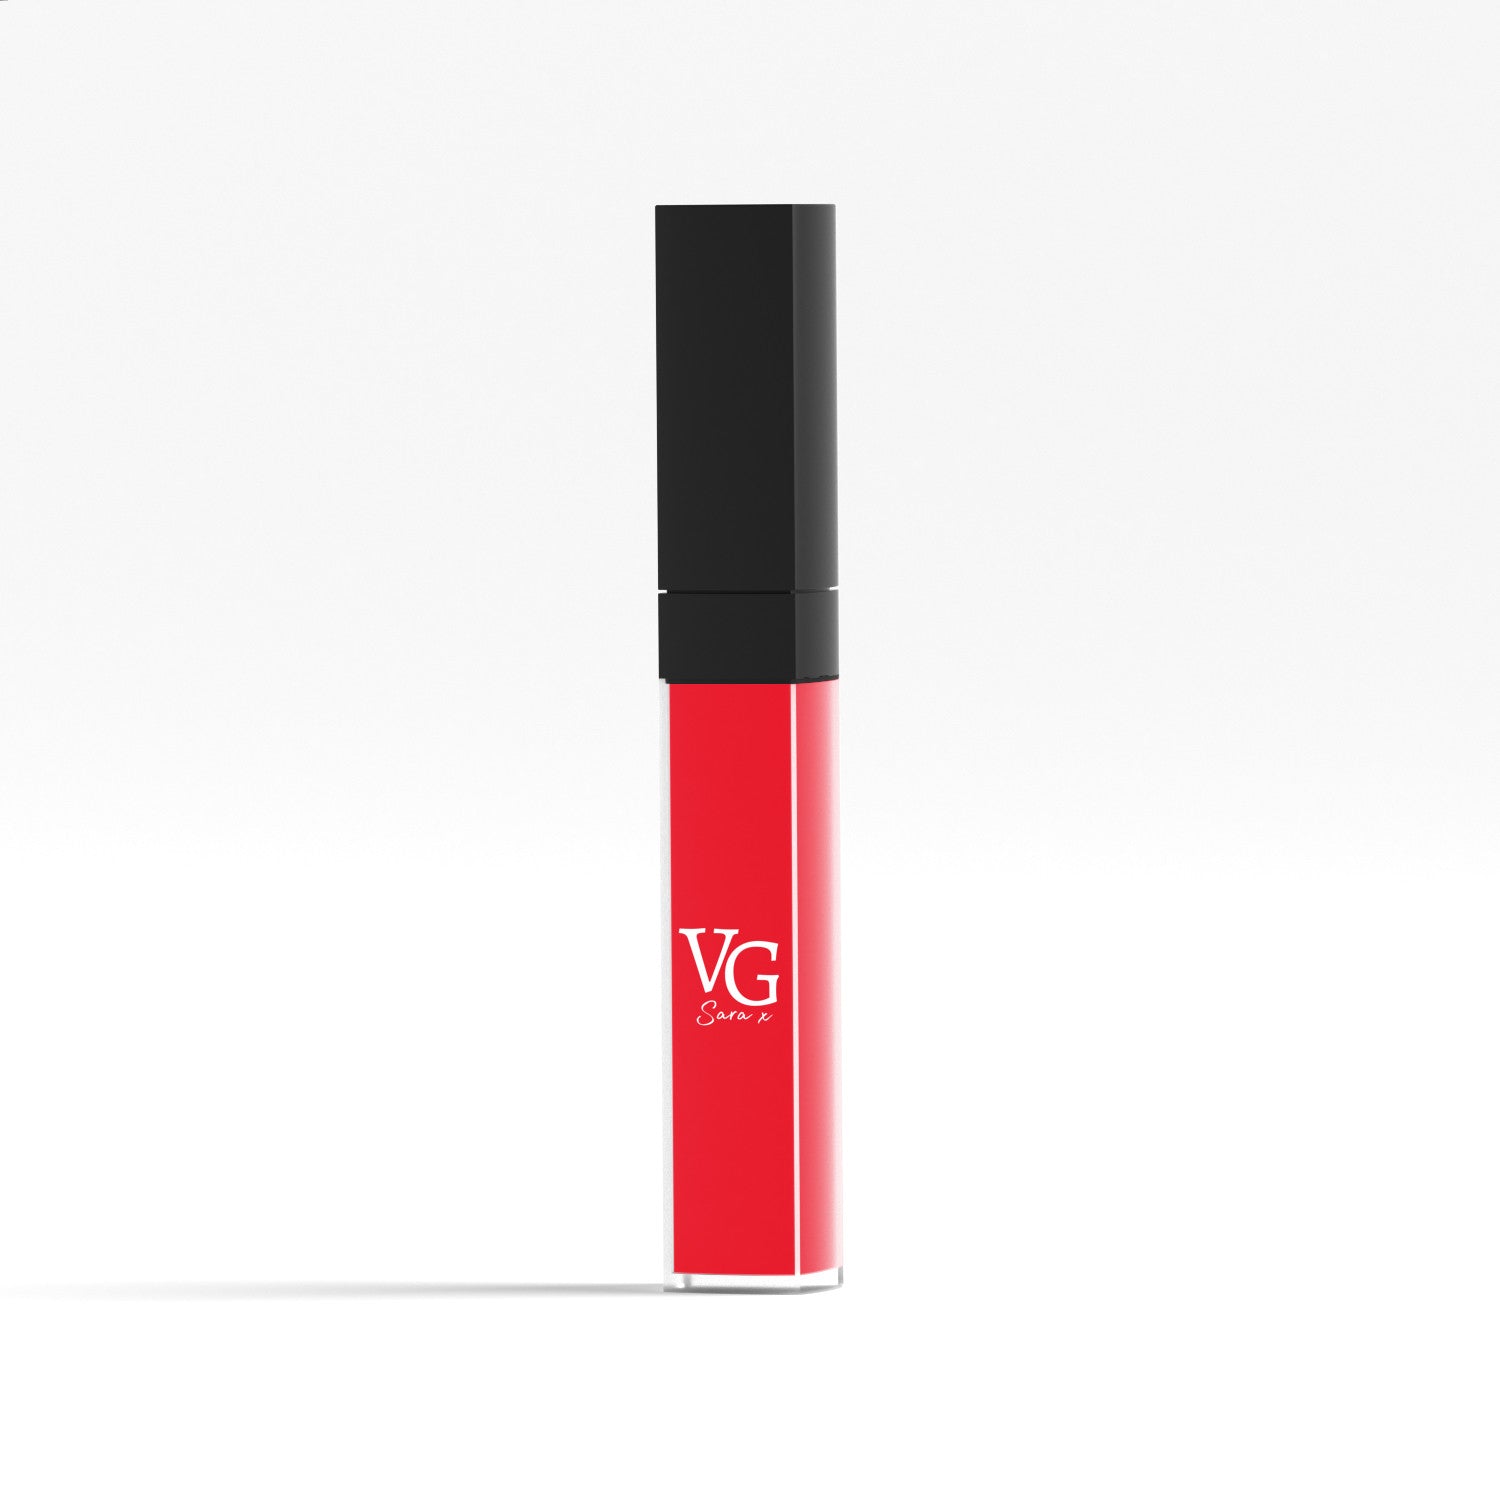 VG branded vegan lipstick in its container